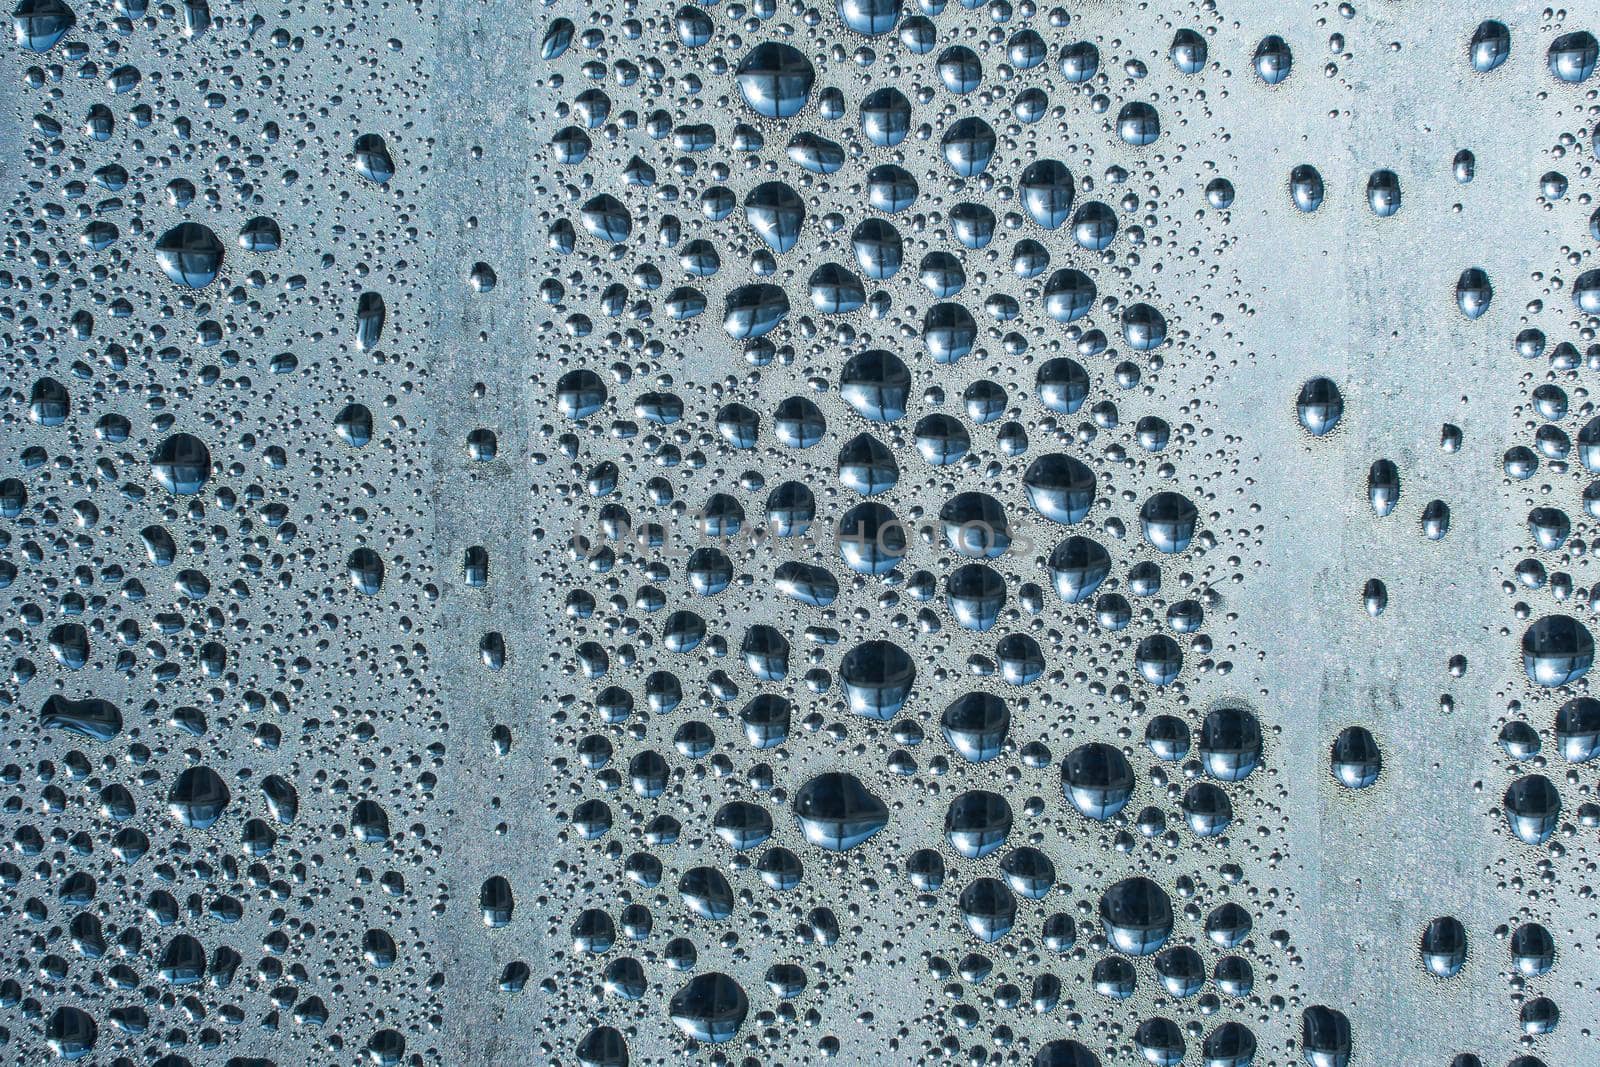 Raindrops on the glass in rainy weather.The glittering, shiny surface of water on glass.Water drops in the form of balls or spheres.Blue raindrops background. Abstract backgrounds ornament with water by YevgeniySam